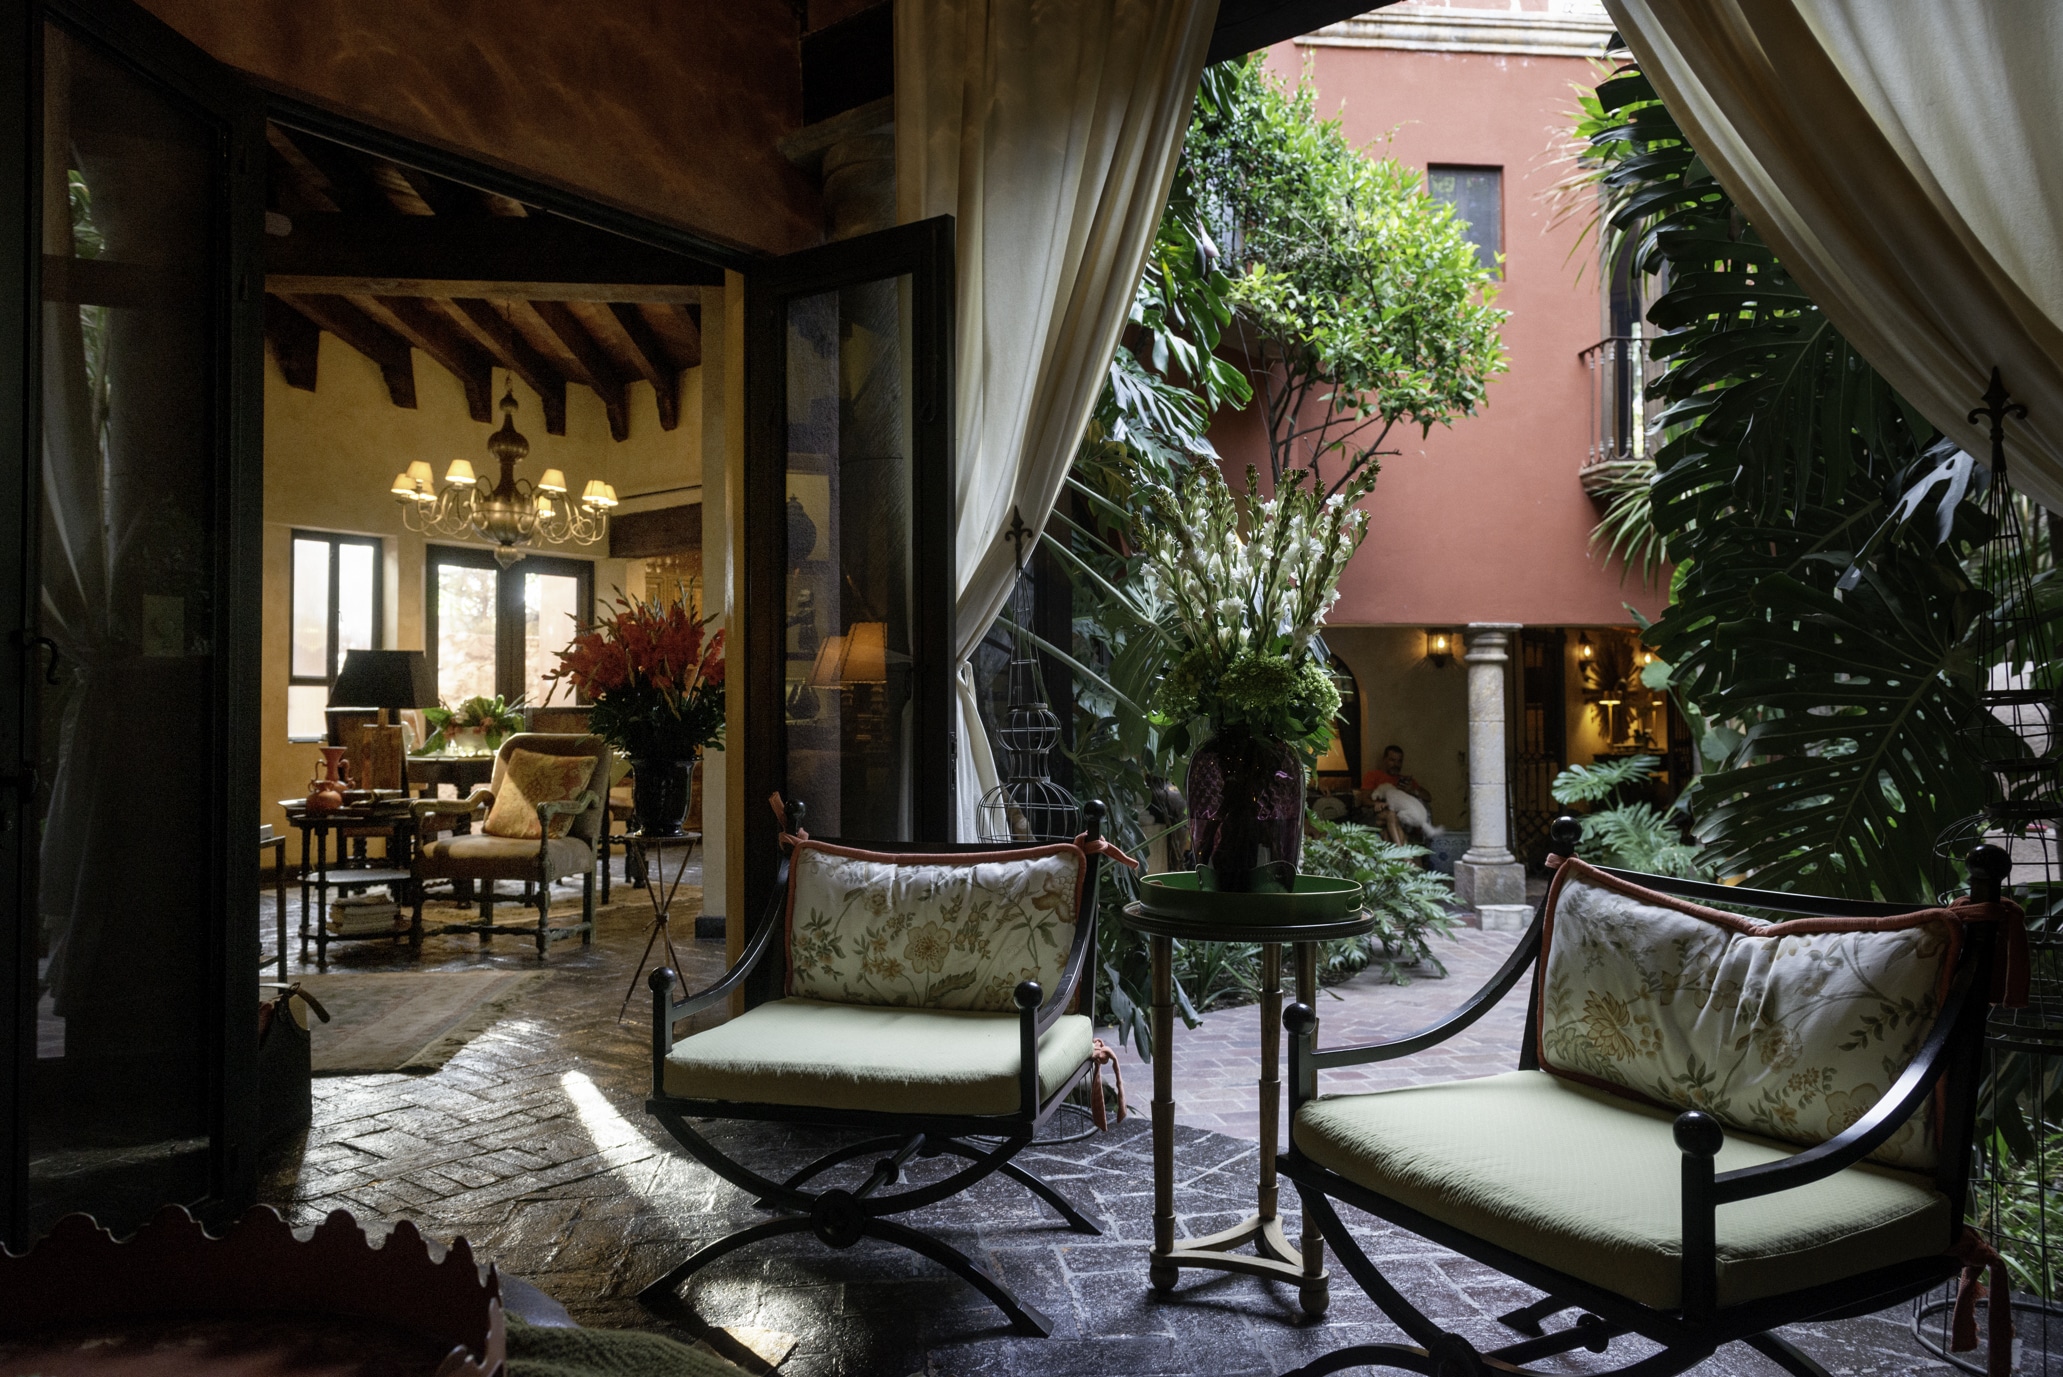 Historic San Miguel De Allende Sees Increased Interest From Younger Buyers To Start 2022